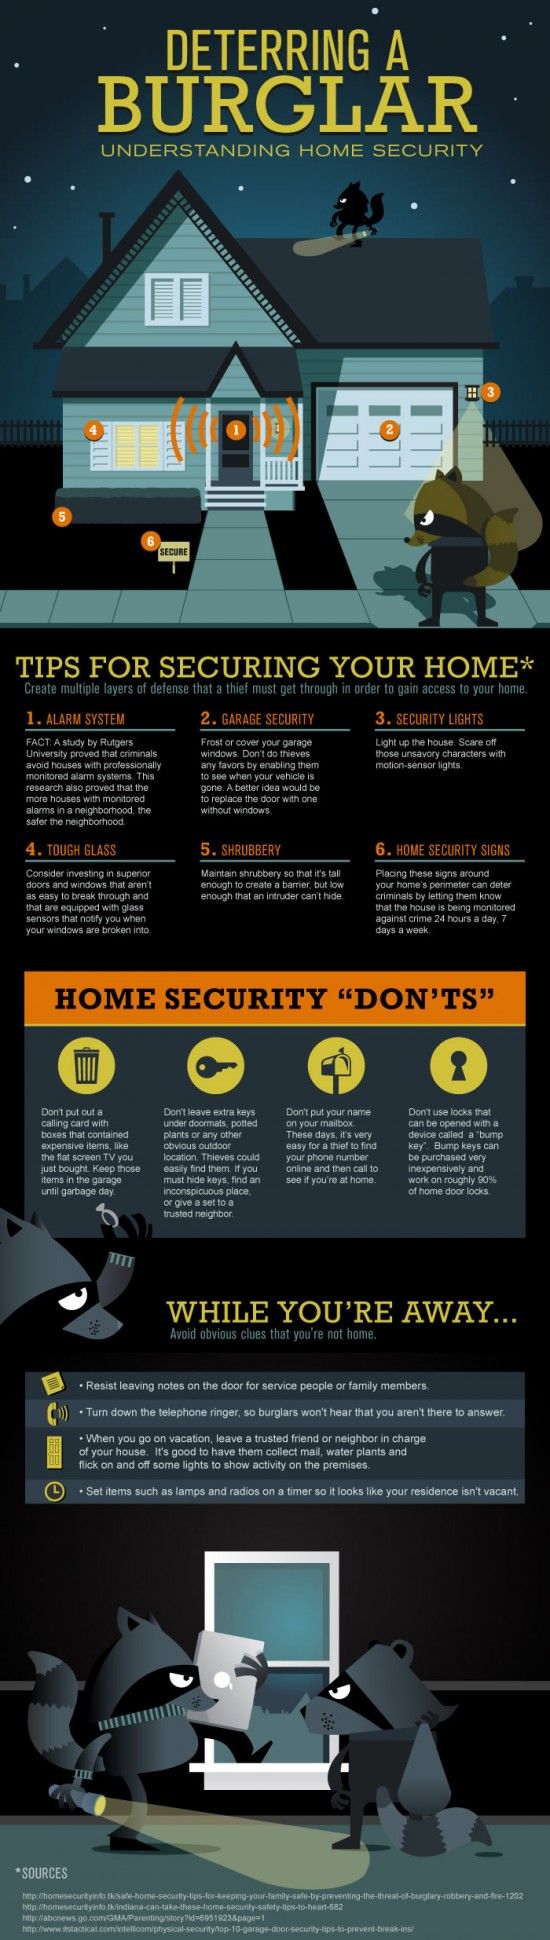 Home Security Do's and Don'ts